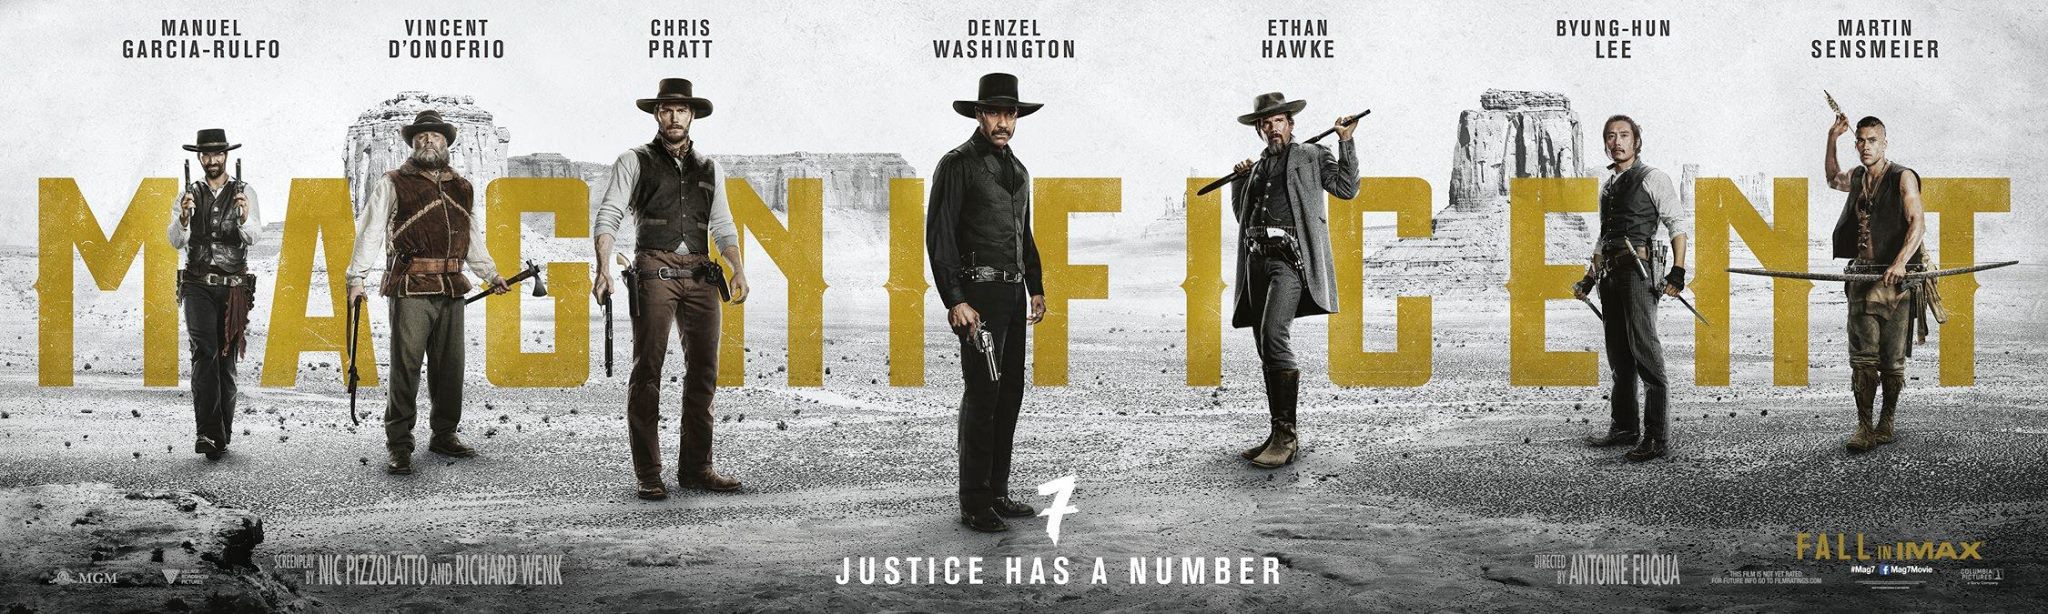 Mega Sized Movie Poster Image for The Magnificent Seven (#1 of 11)